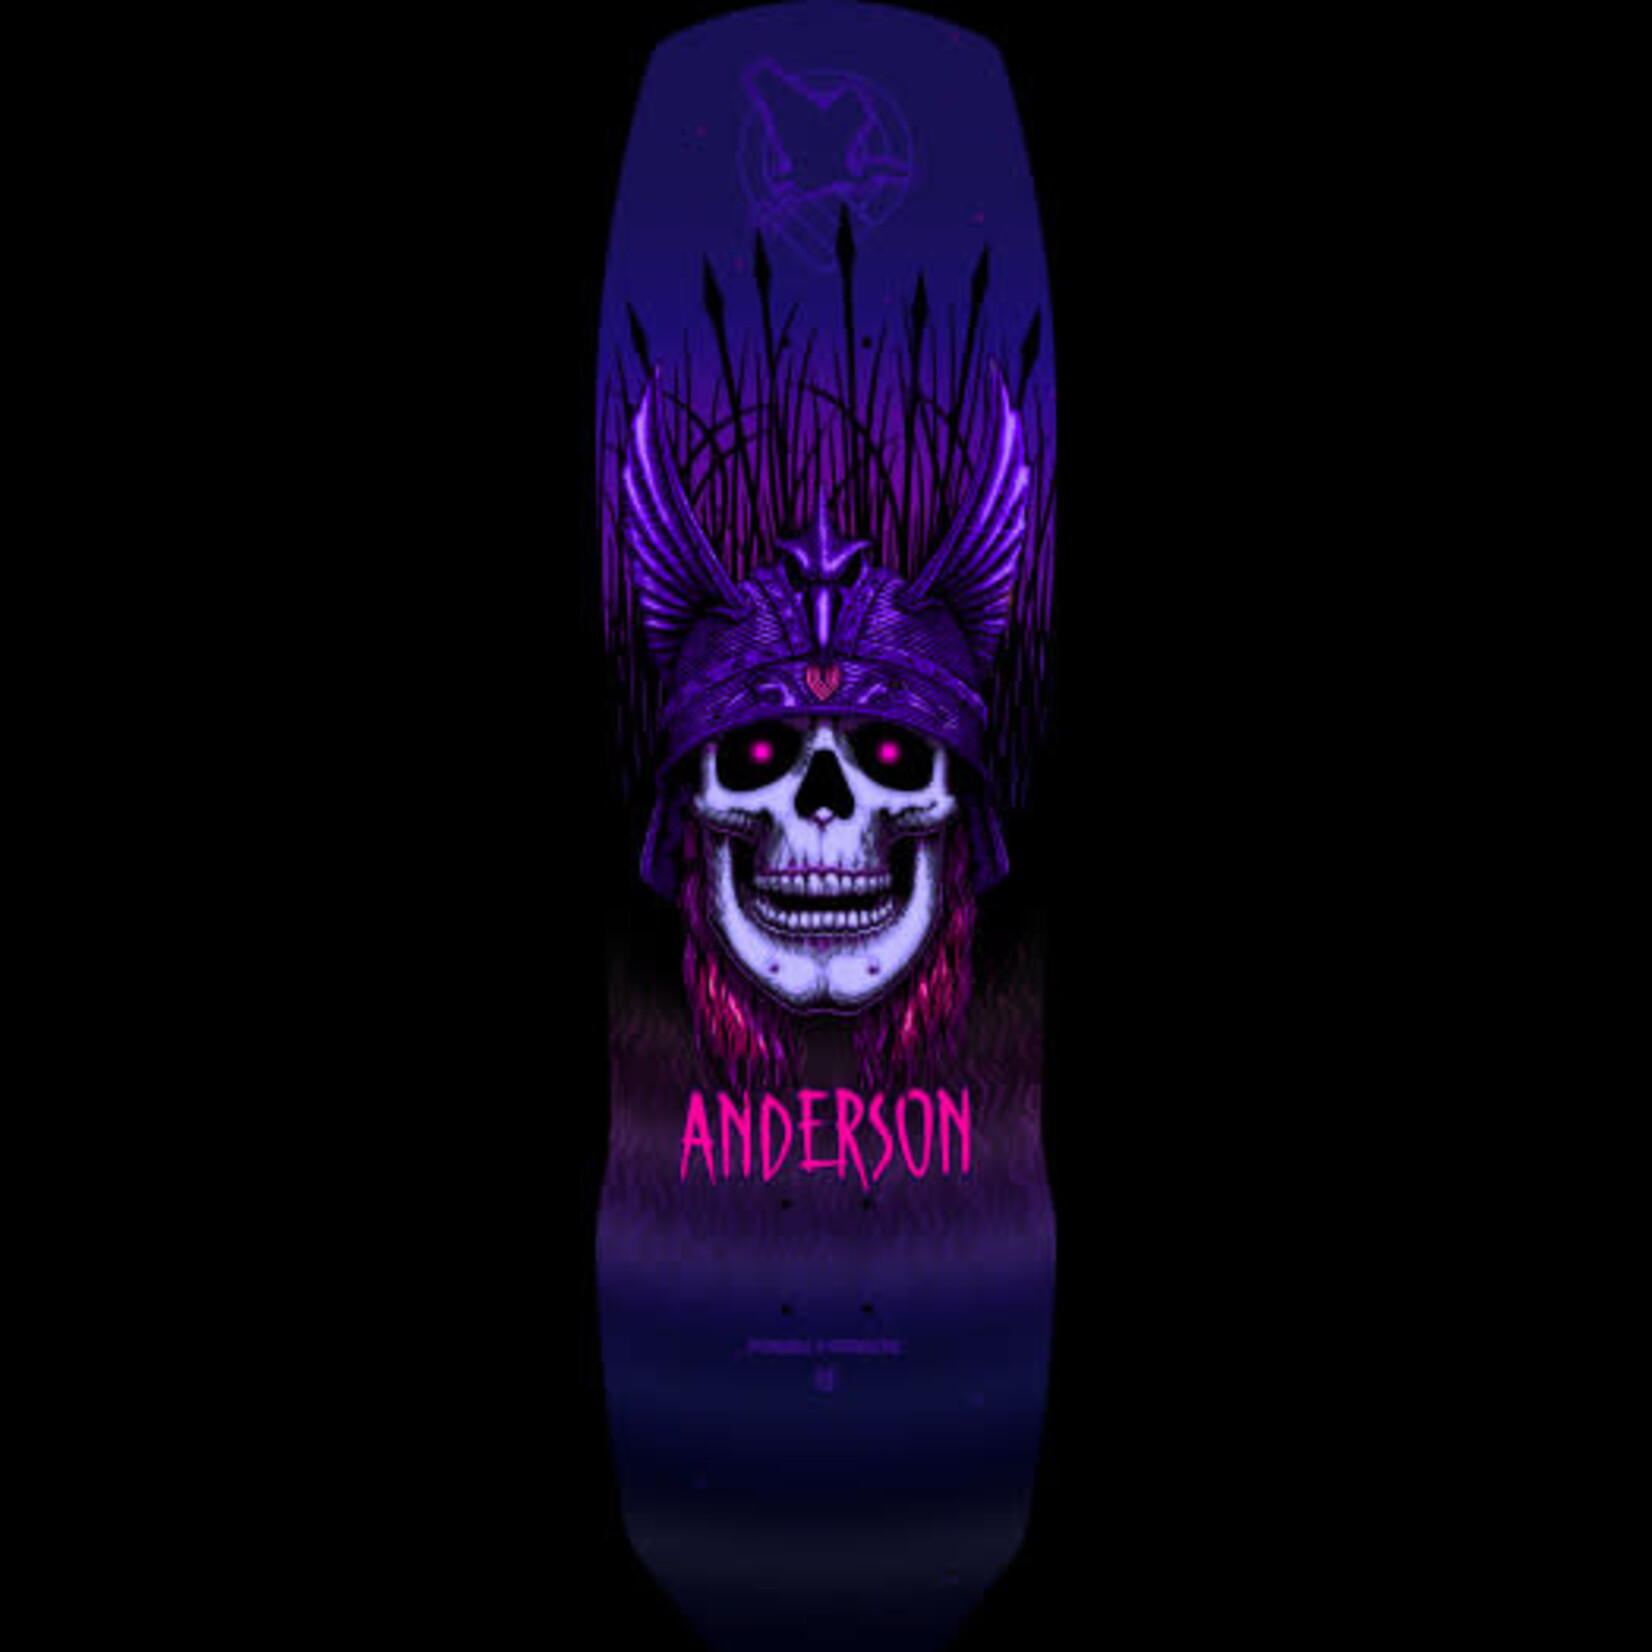 Powell Powell Peralta Pro Andy Anderson Heron 7-Ply Maple Skateboard Deck - 8.45 x 31.8